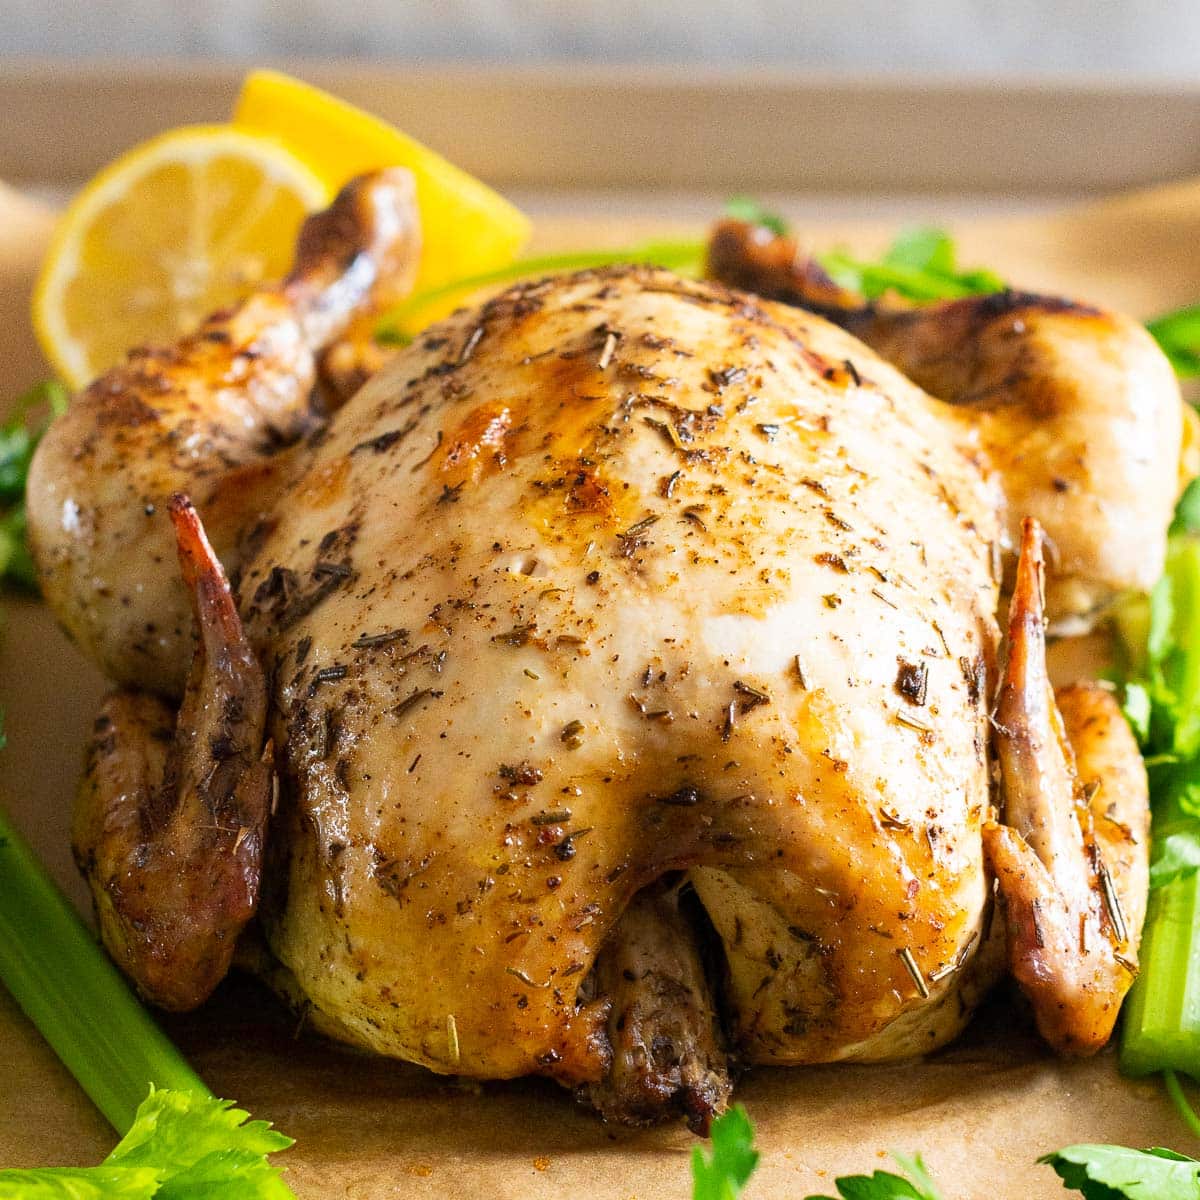 CrockPot Rotisserie-Style Chicken Recipe - A Year of Slow Cooking